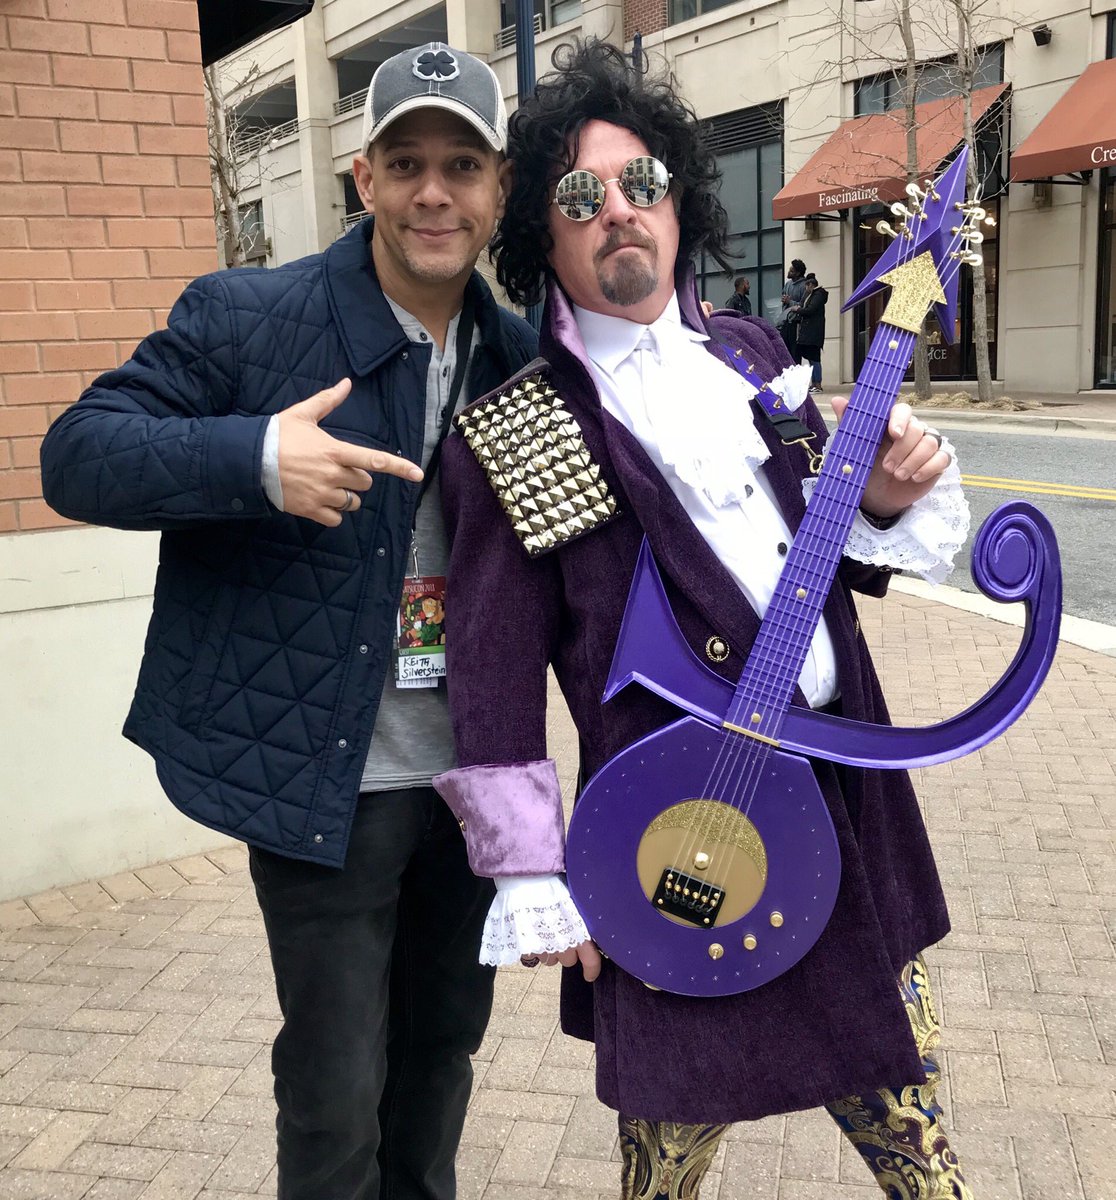 Rock and Roll is alive and it lives in @Katsucon #Prince #purplerain #hisroyalbadness #cosplay